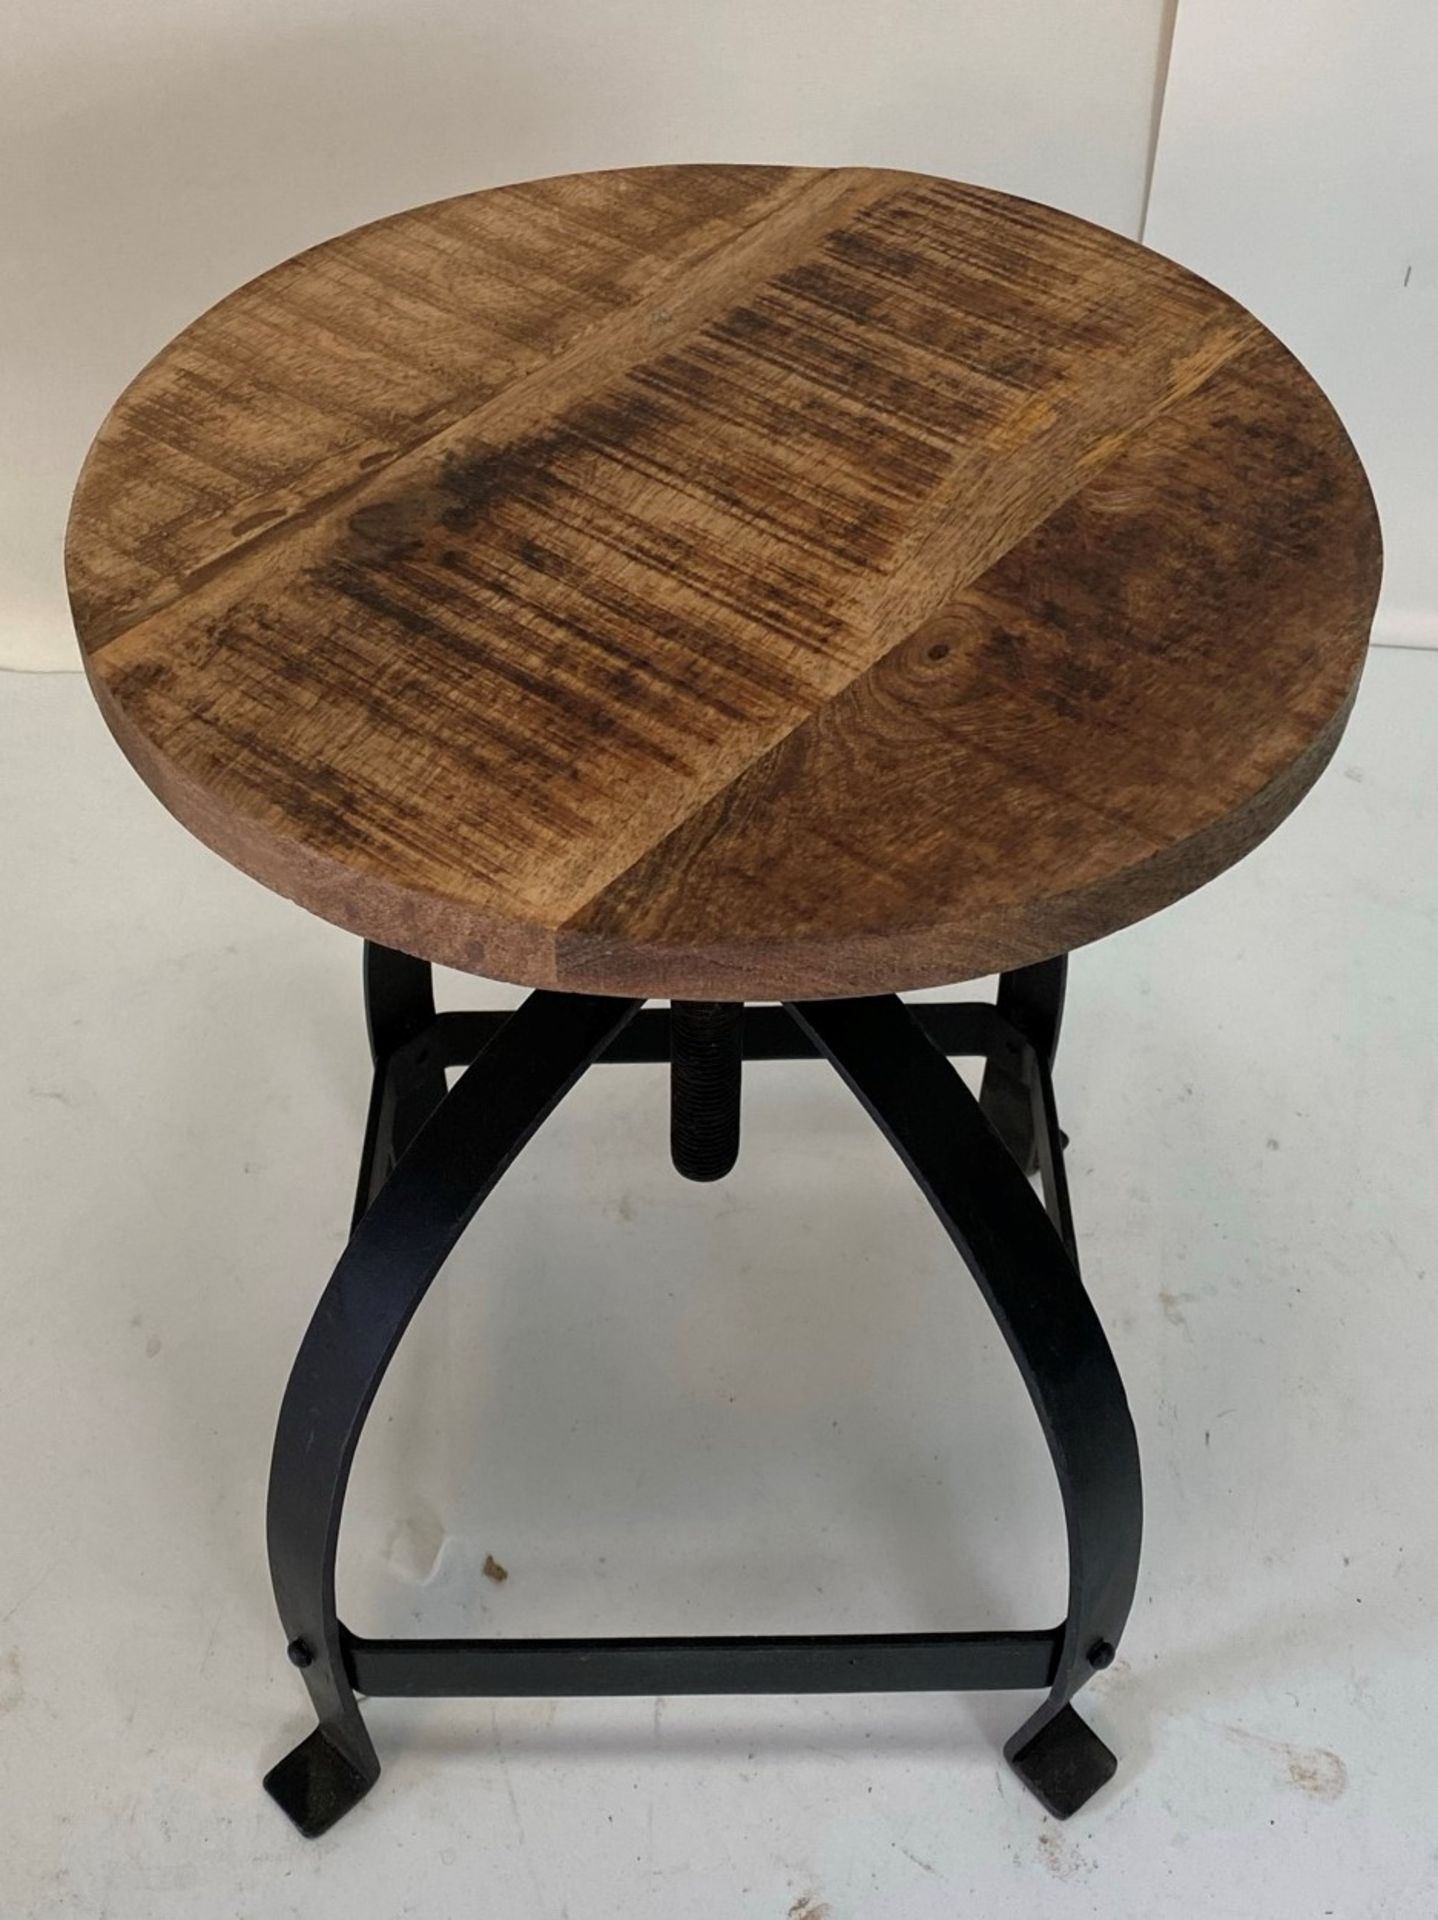 An Industrial low stool with wooden seat and black metal frame - Image 3 of 4